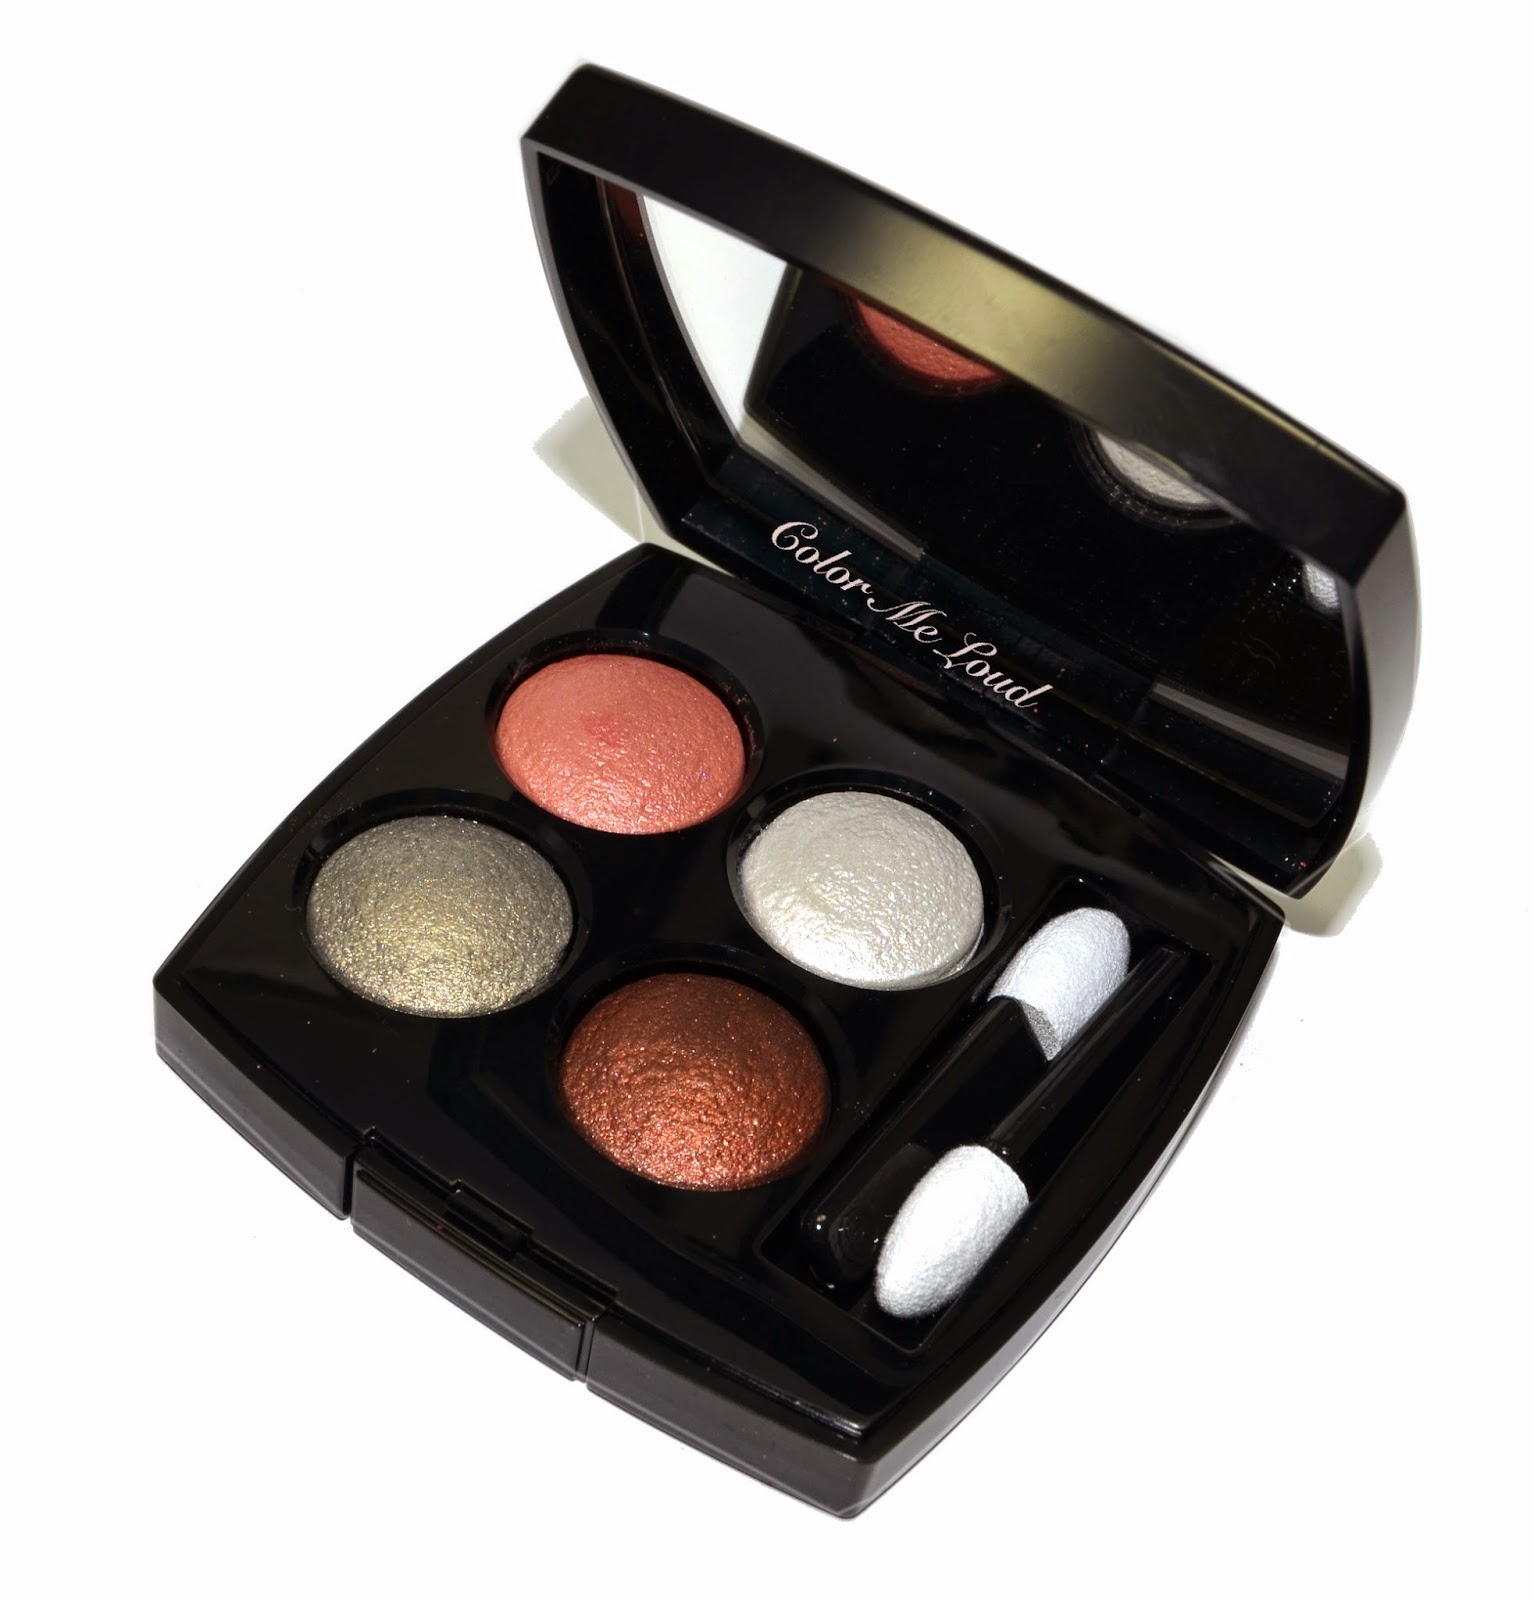 Chanel Tisse Fantaisie (236) Les 4 Ombres Multi-Effect Quadra Eyeshadow  Review & Swatches